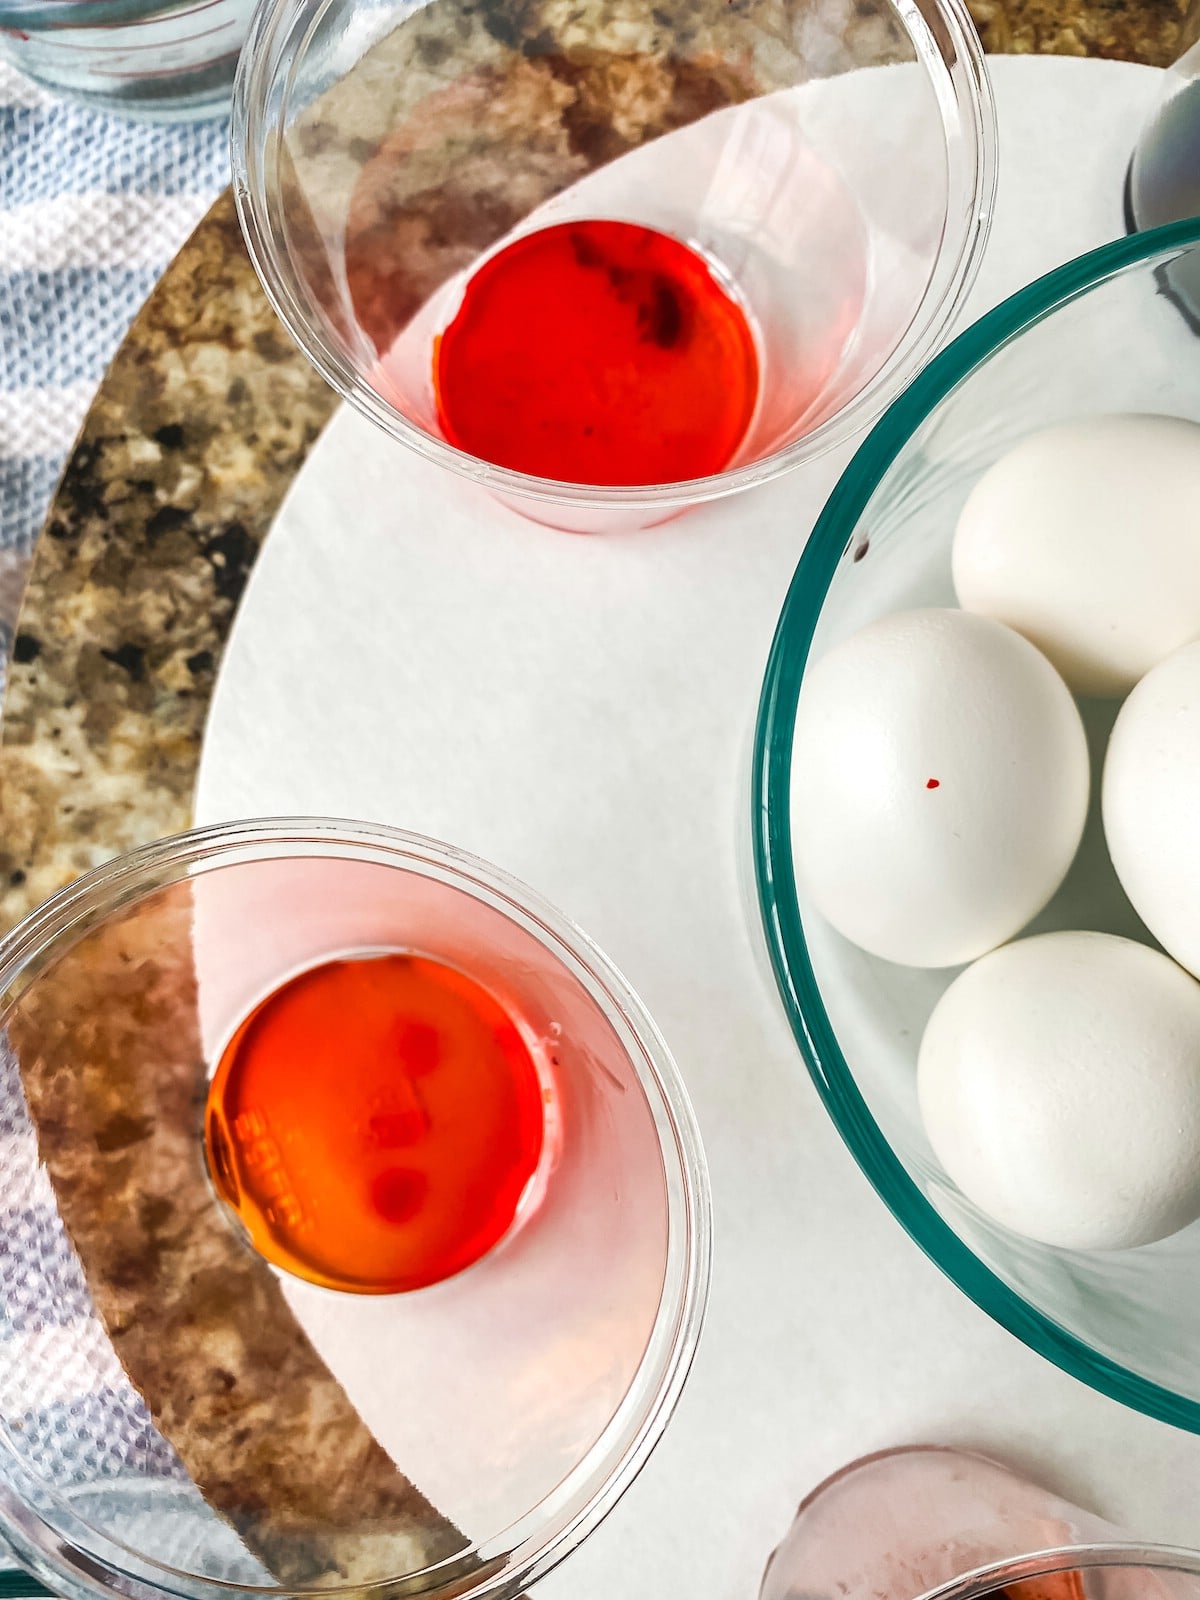 Cups of dyed water on tray with boiled eggs